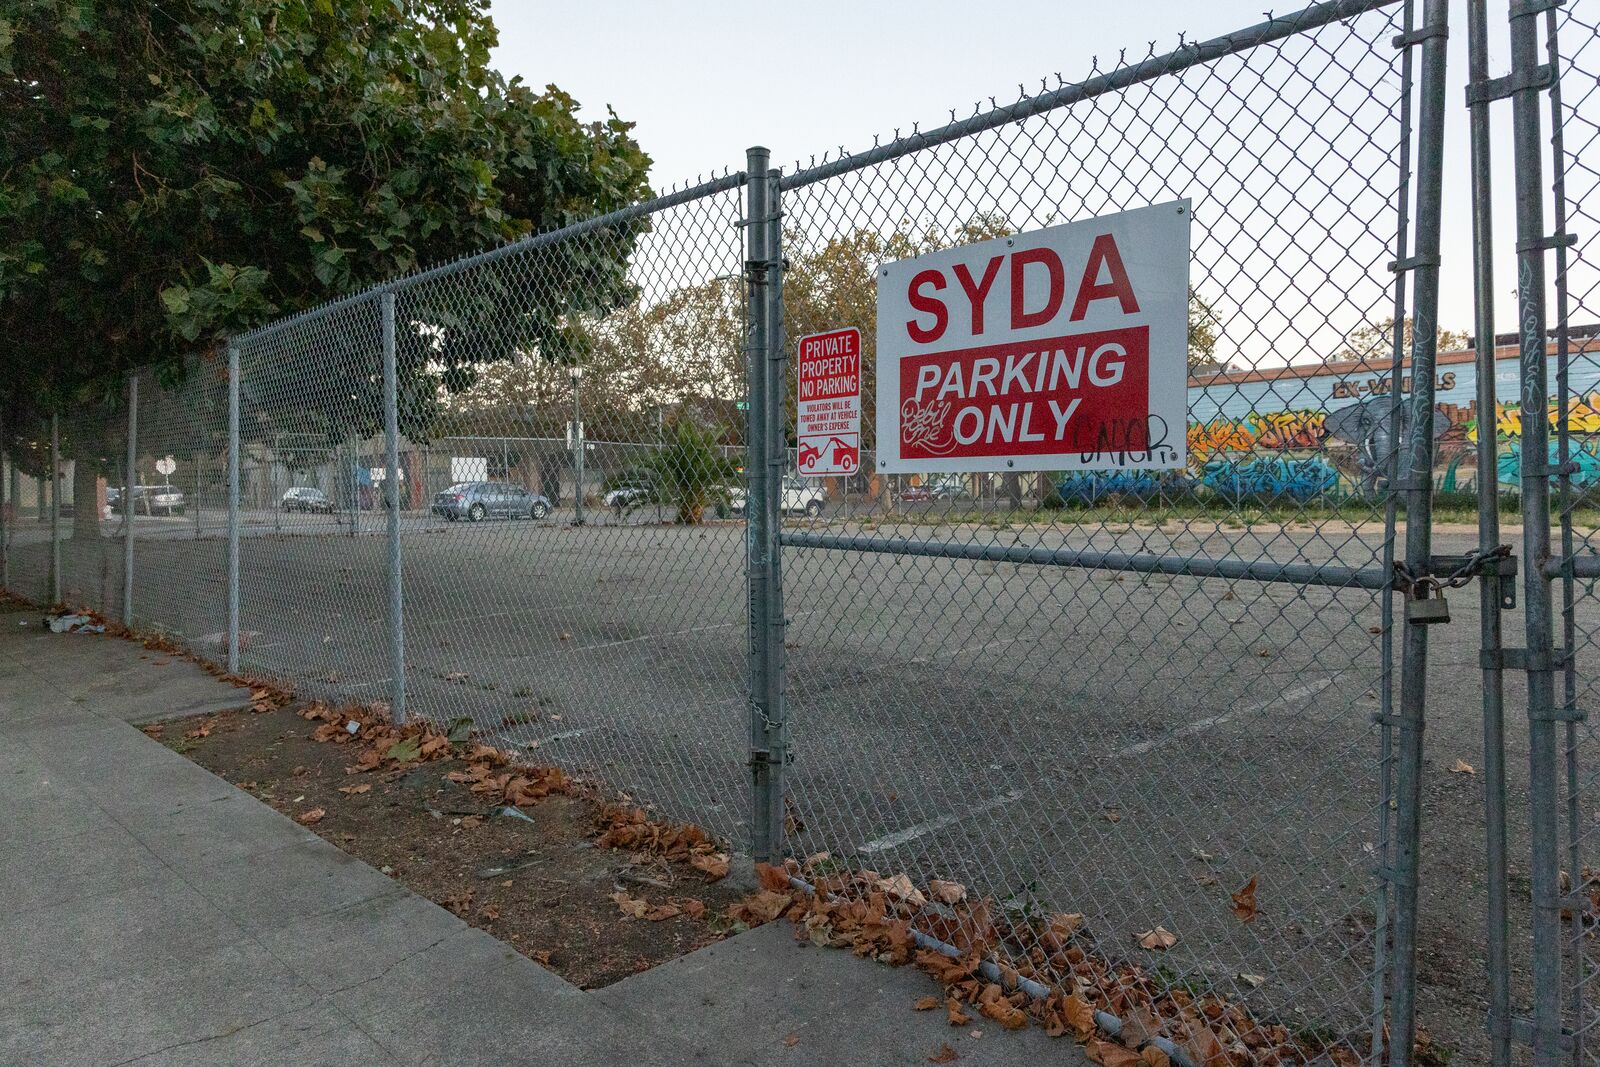 An empty, fenced-off parking lot with a sign that says "SYDA parking only."